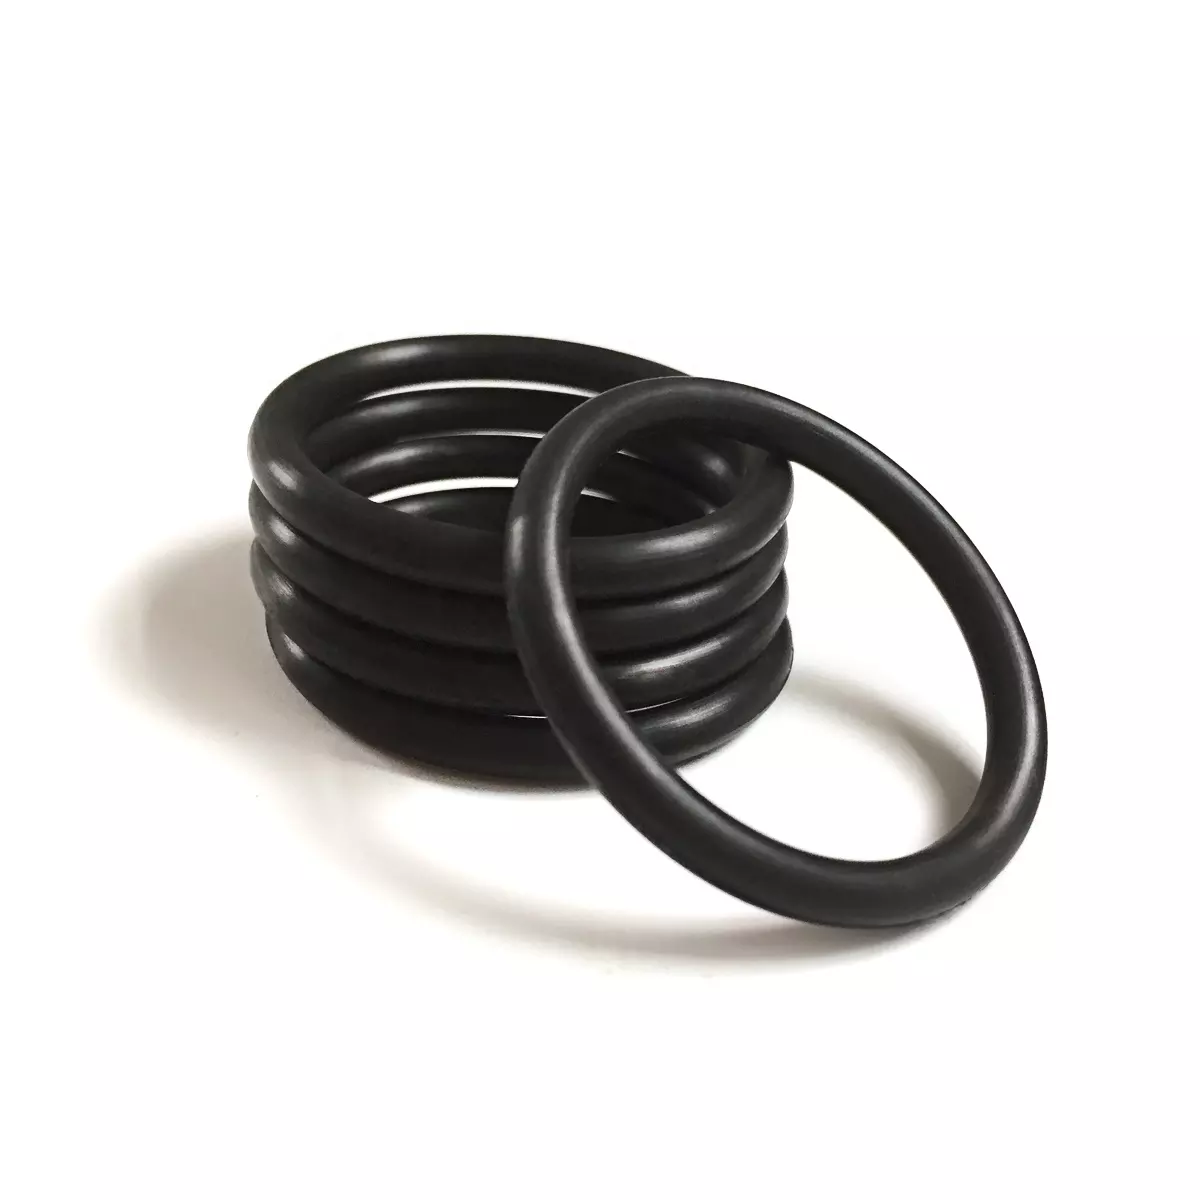 Special-shaped Seals Dongguan Bright Rubber